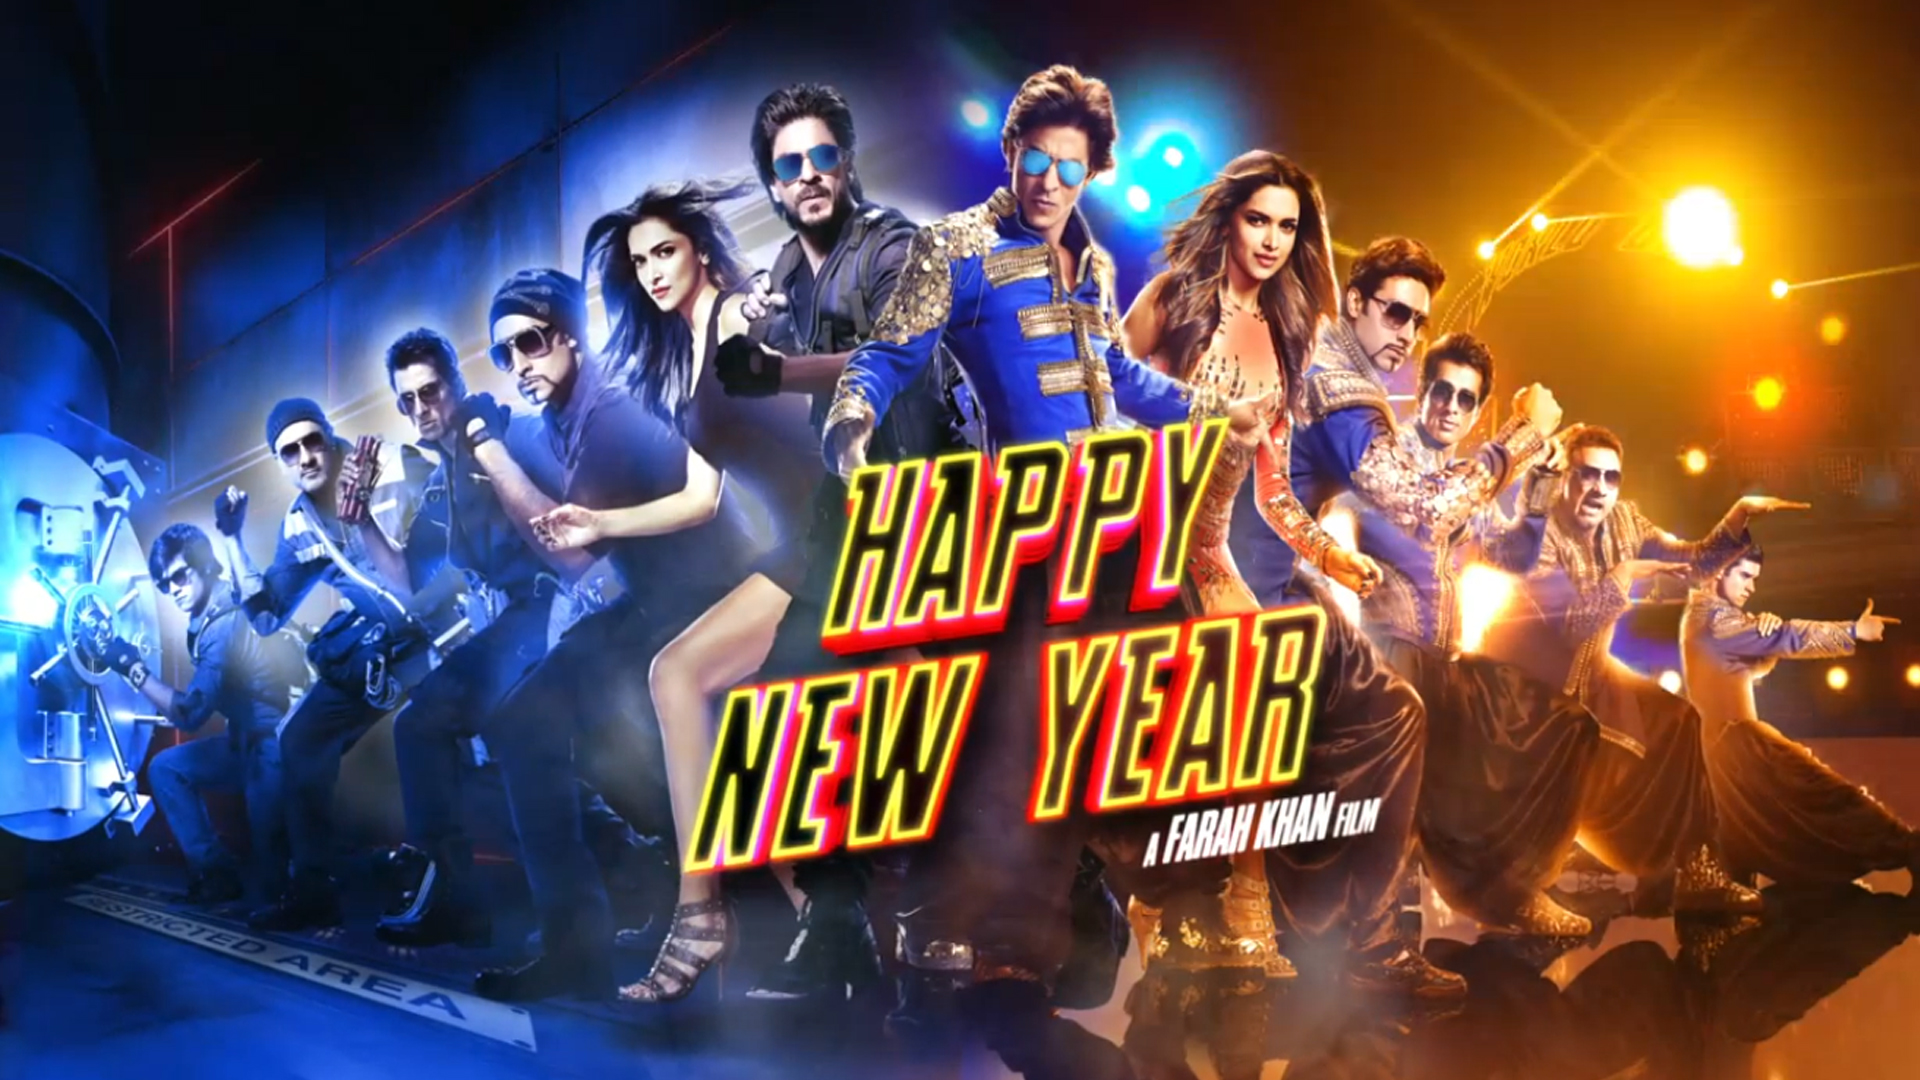 bollywood movie wallpaper,musical,product,performance,talent show,event